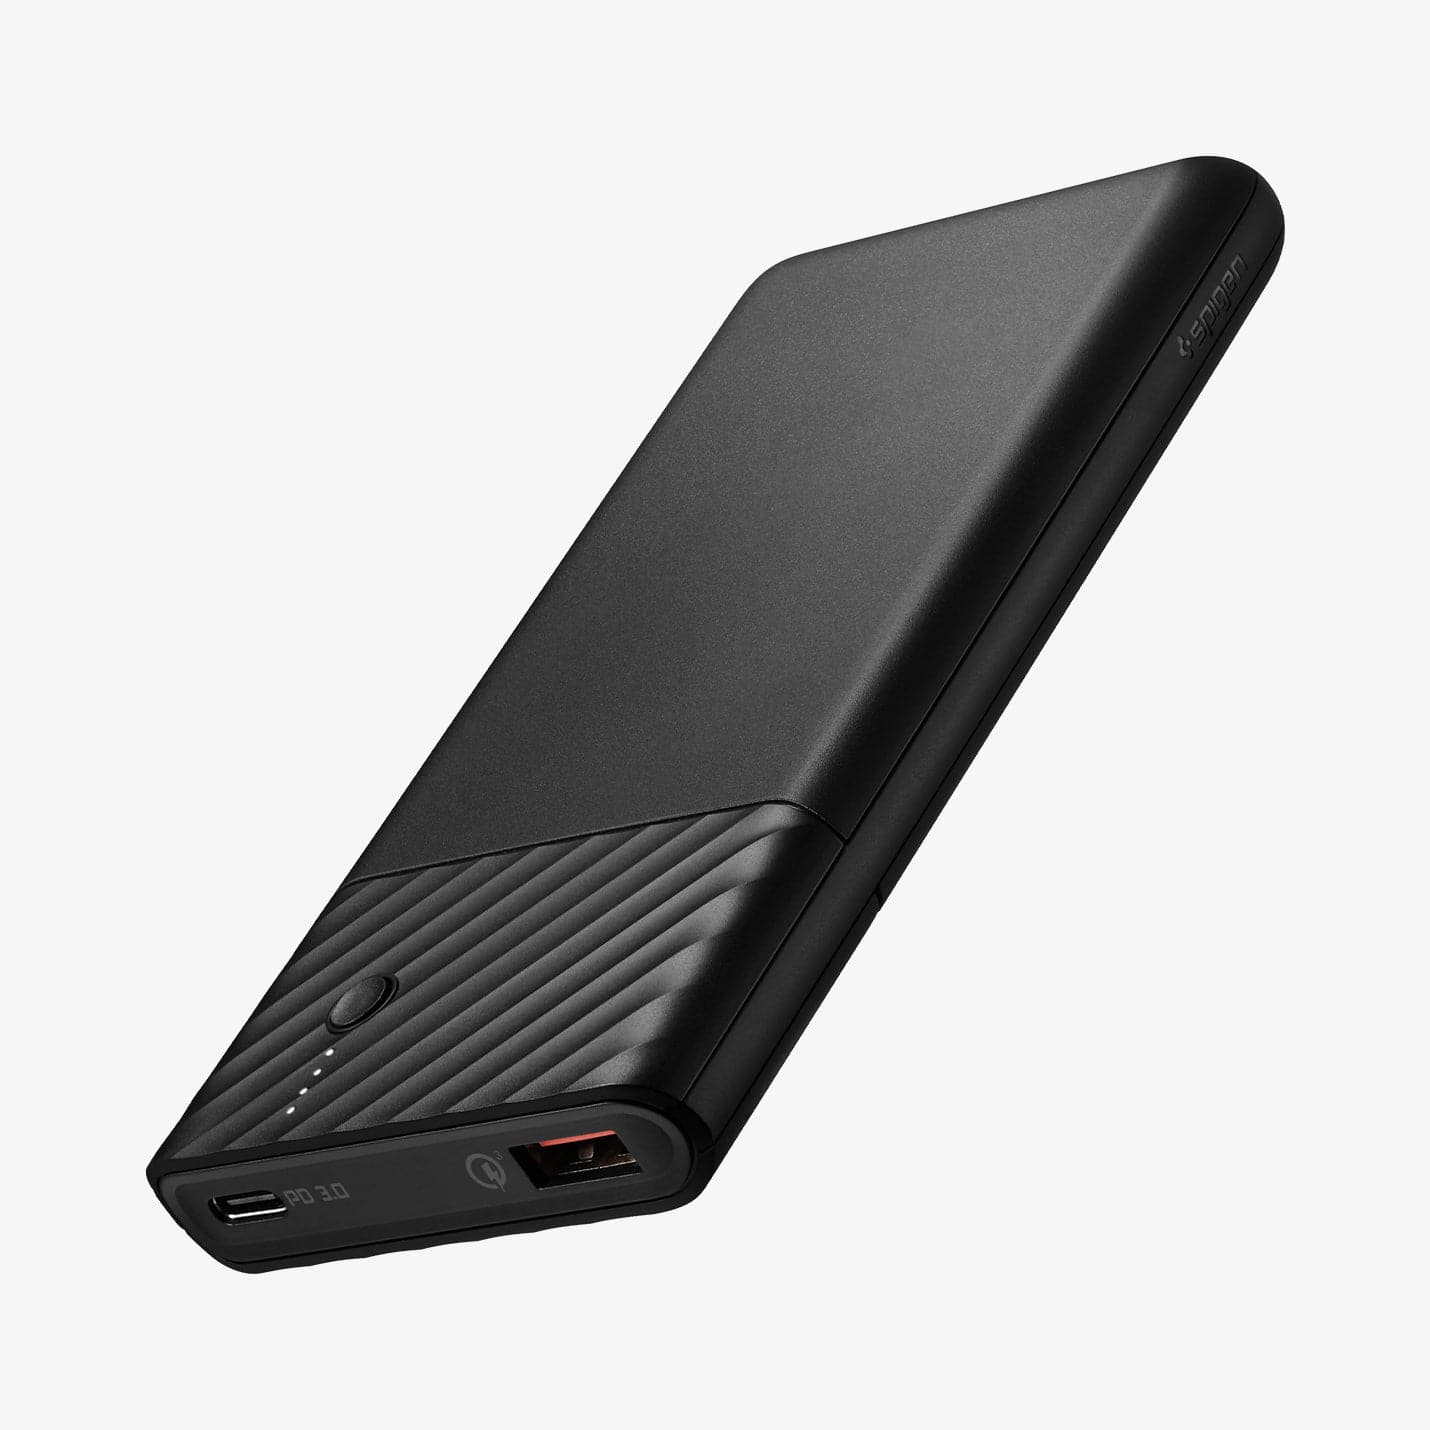 000BA26139 - PocketBoost™ 10,000mAh 18W Portable Charger F732QC in black showing the front, side and bottom